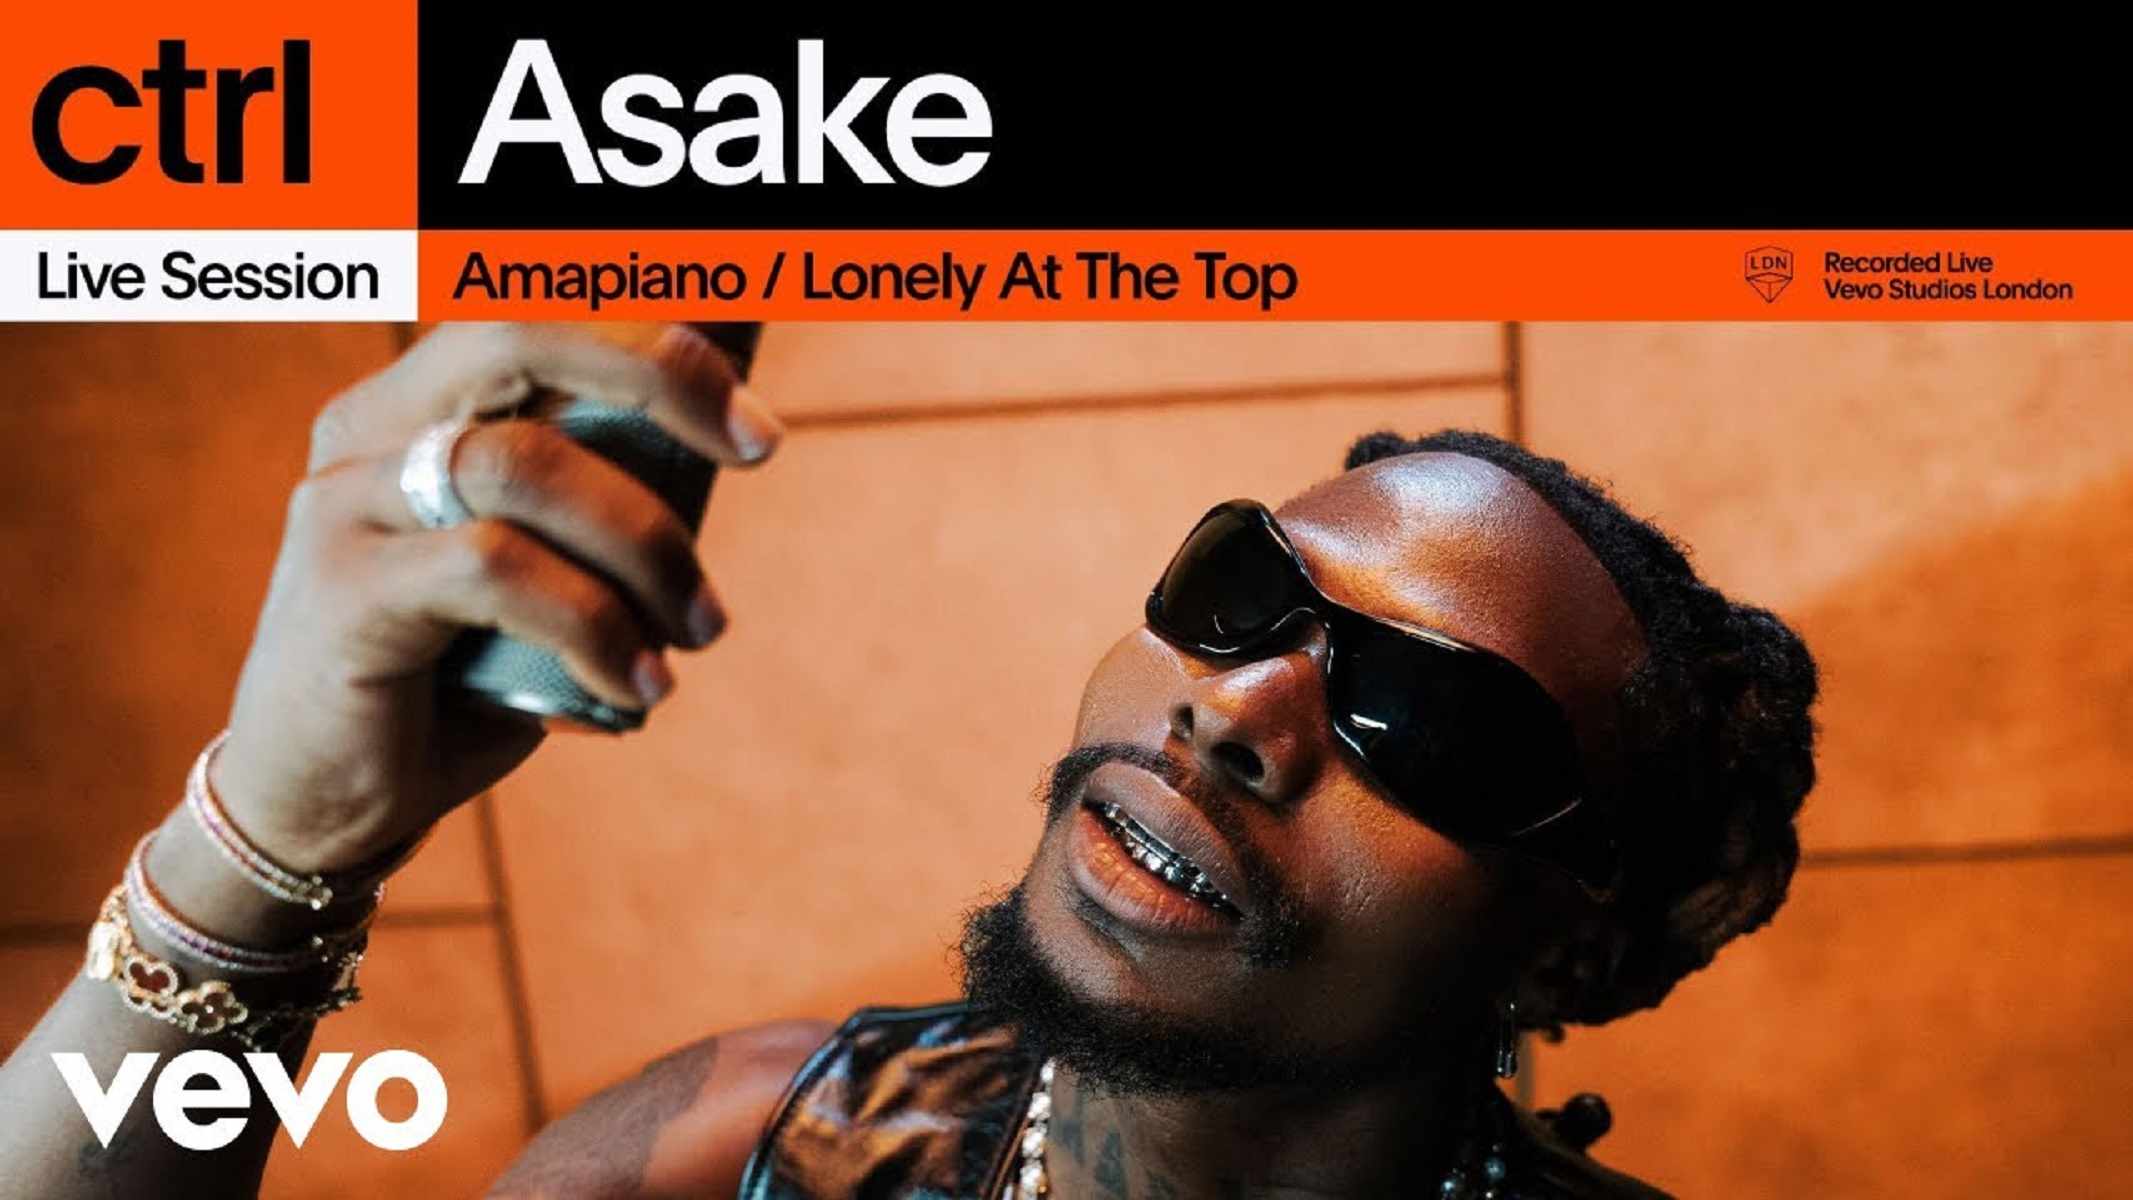 Asake performs "Amapiano" & "Lonely At The Top" on » MPmania